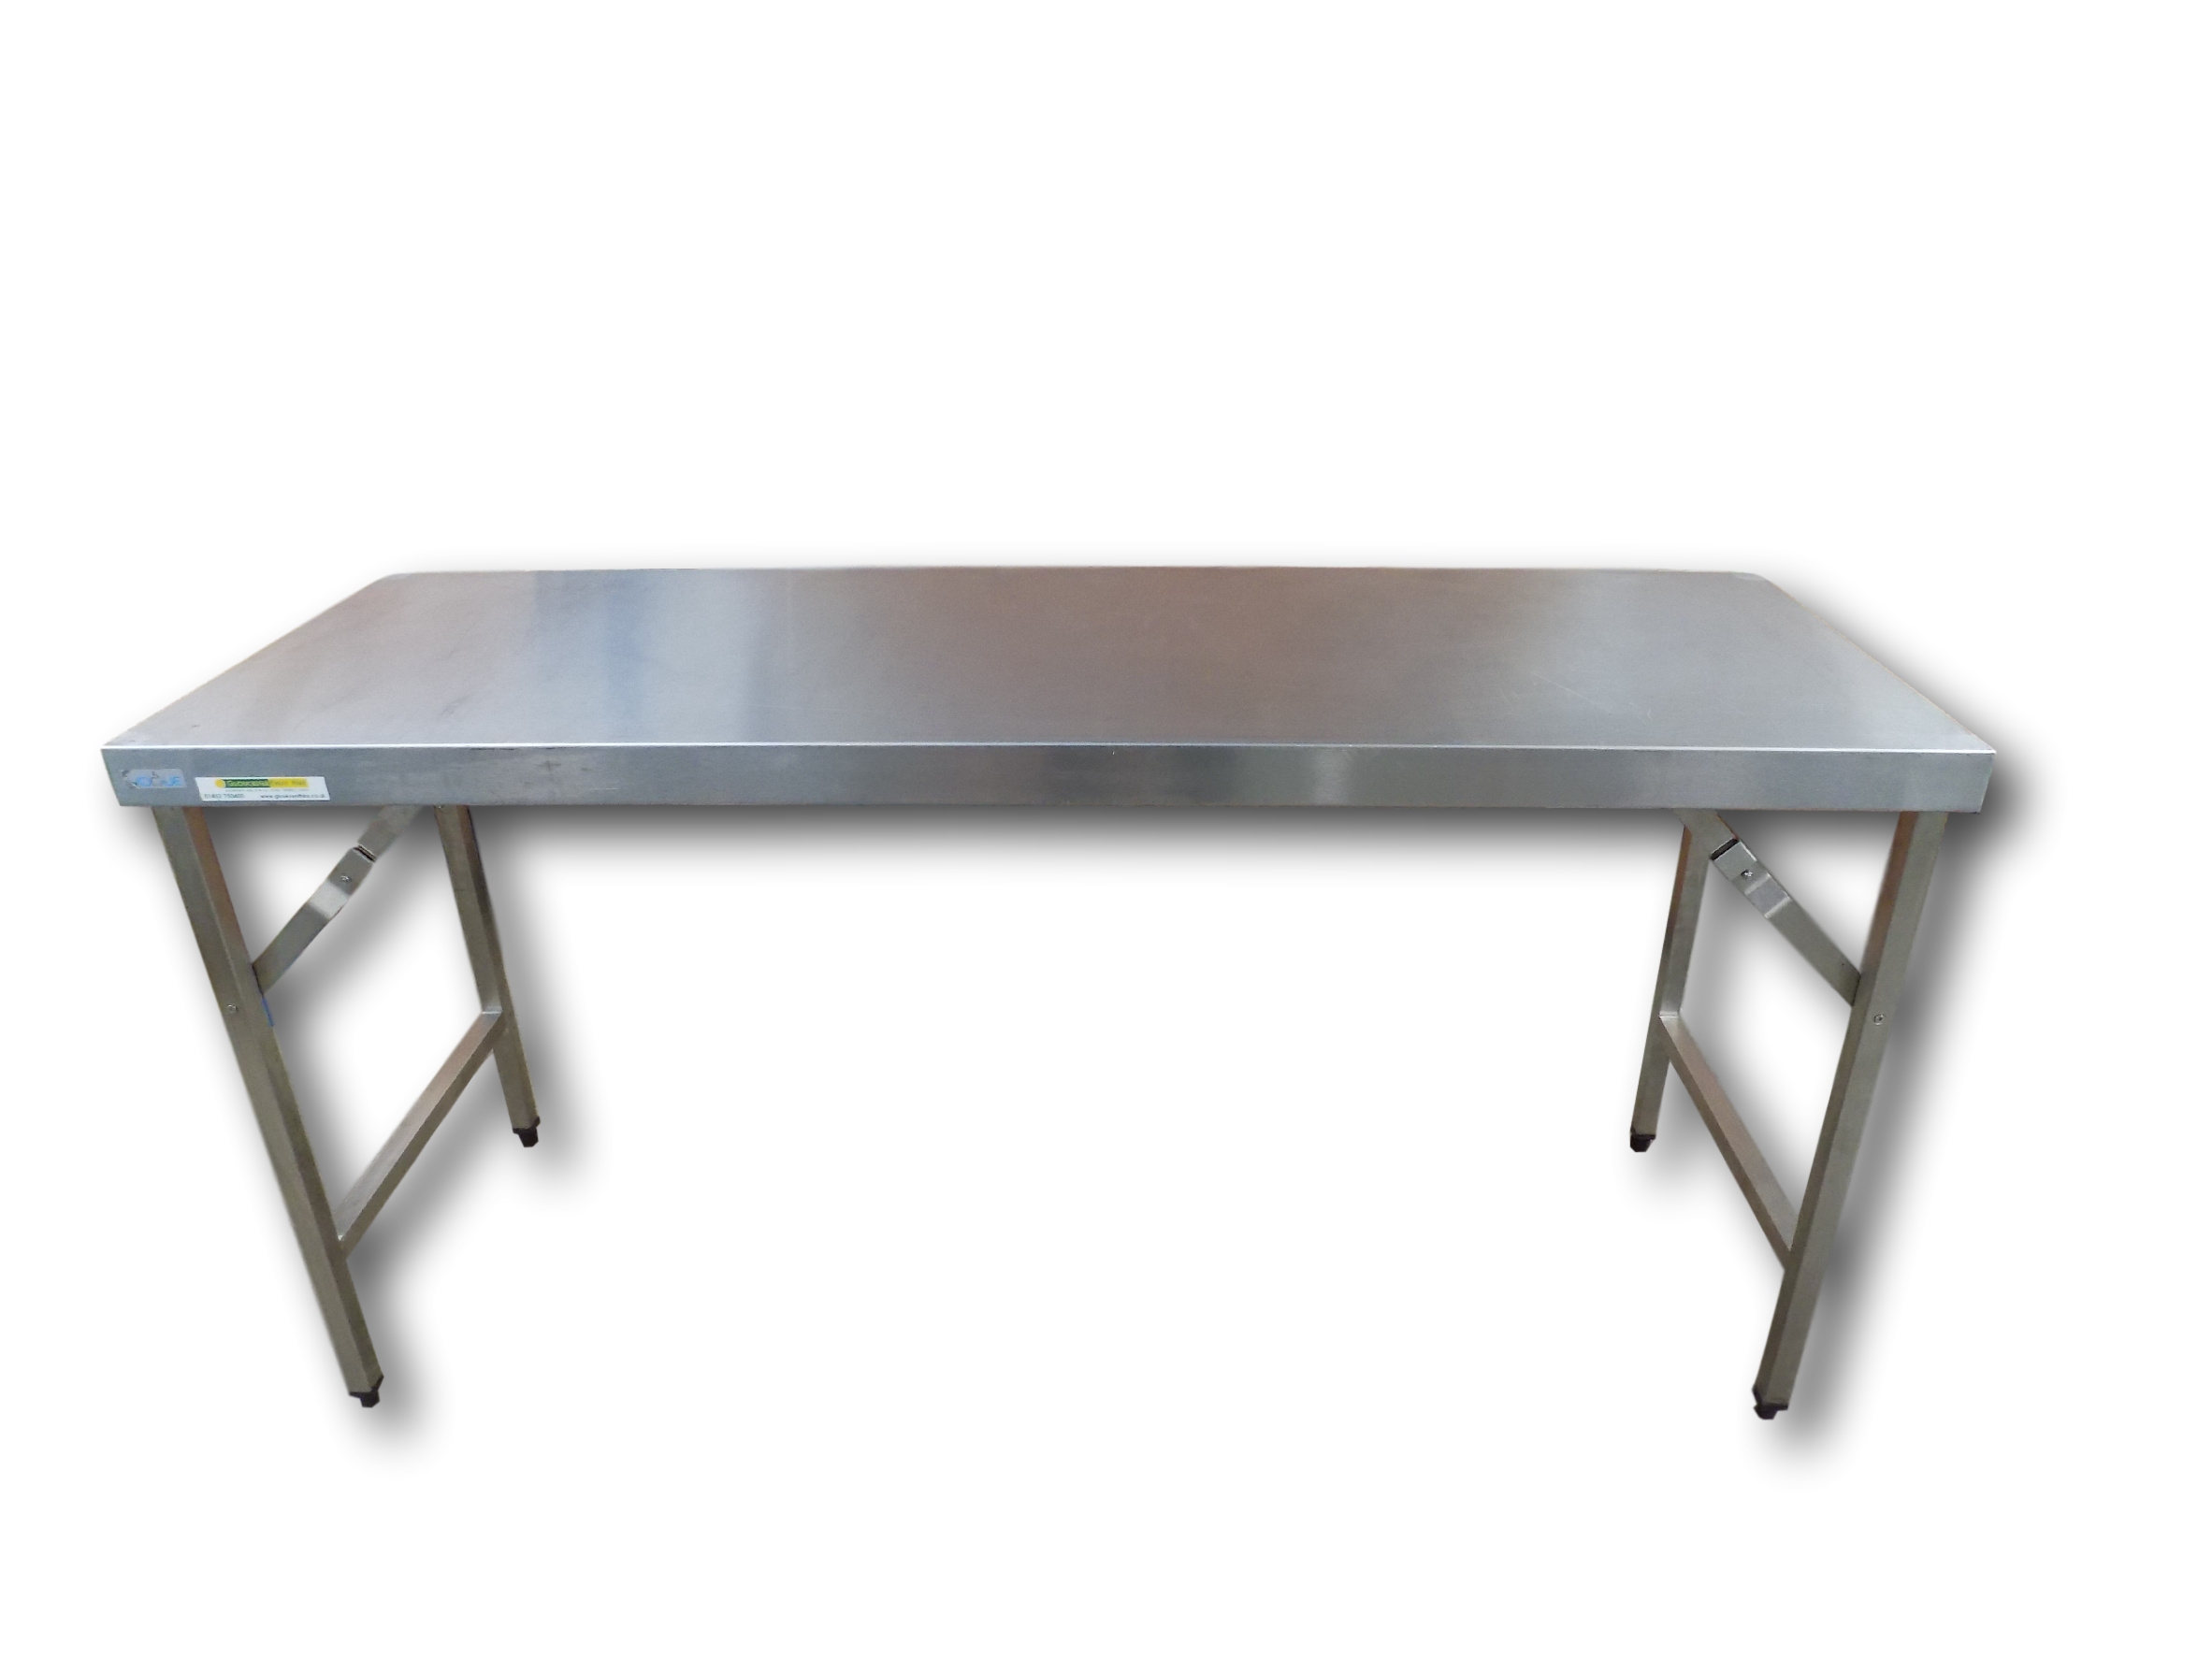 Gloucester Event Hire - 1800mm Stainless Steel Prep. Table. Folding Legs Stainless Steel Folding Prep Table